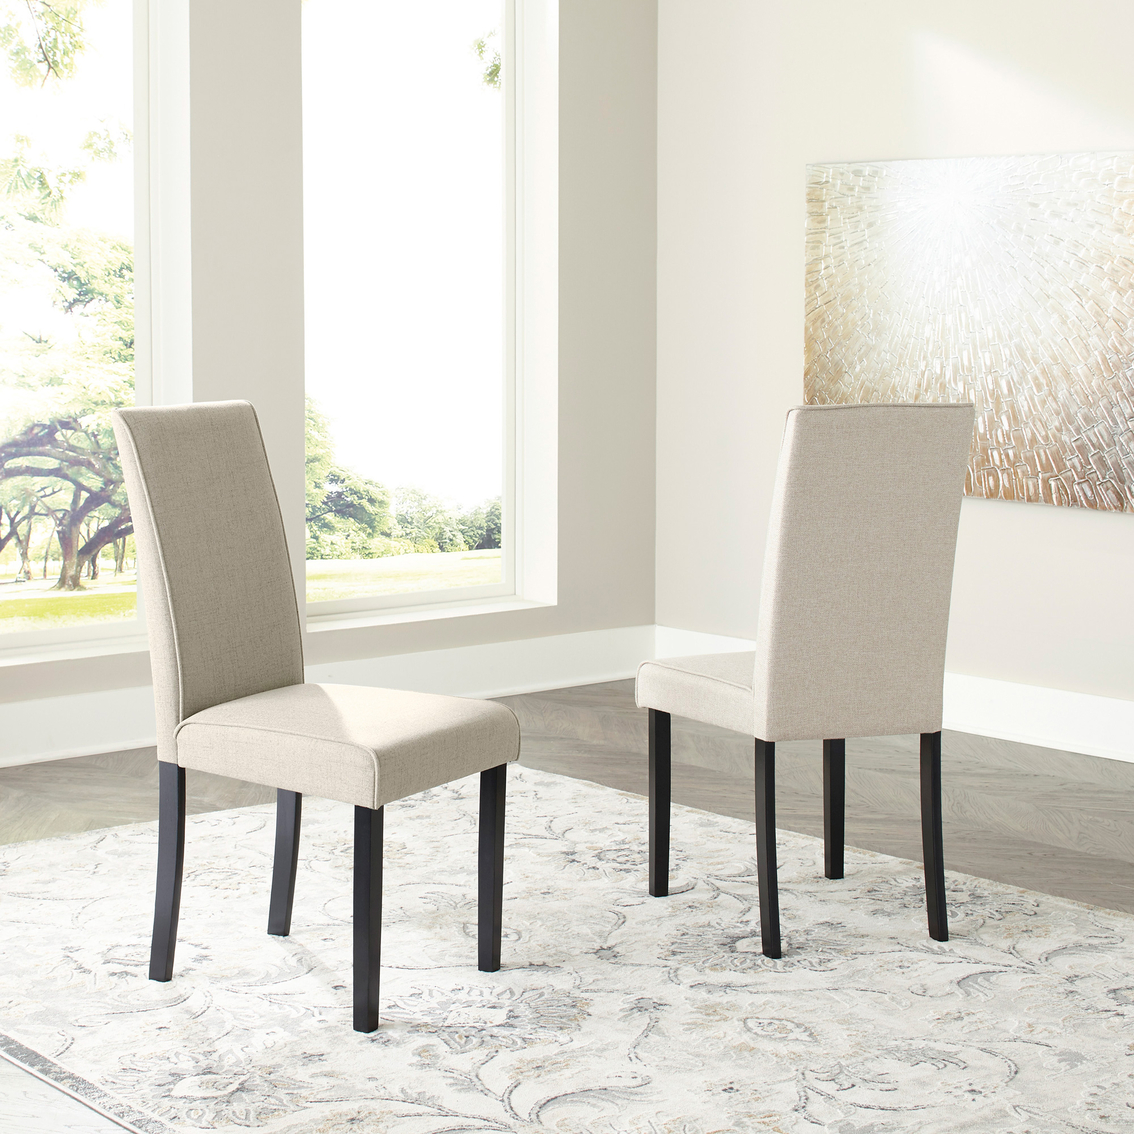 Signature Design by Ashley Kimonte Dining Room Side Chair 2 pk. - Image 5 of 6